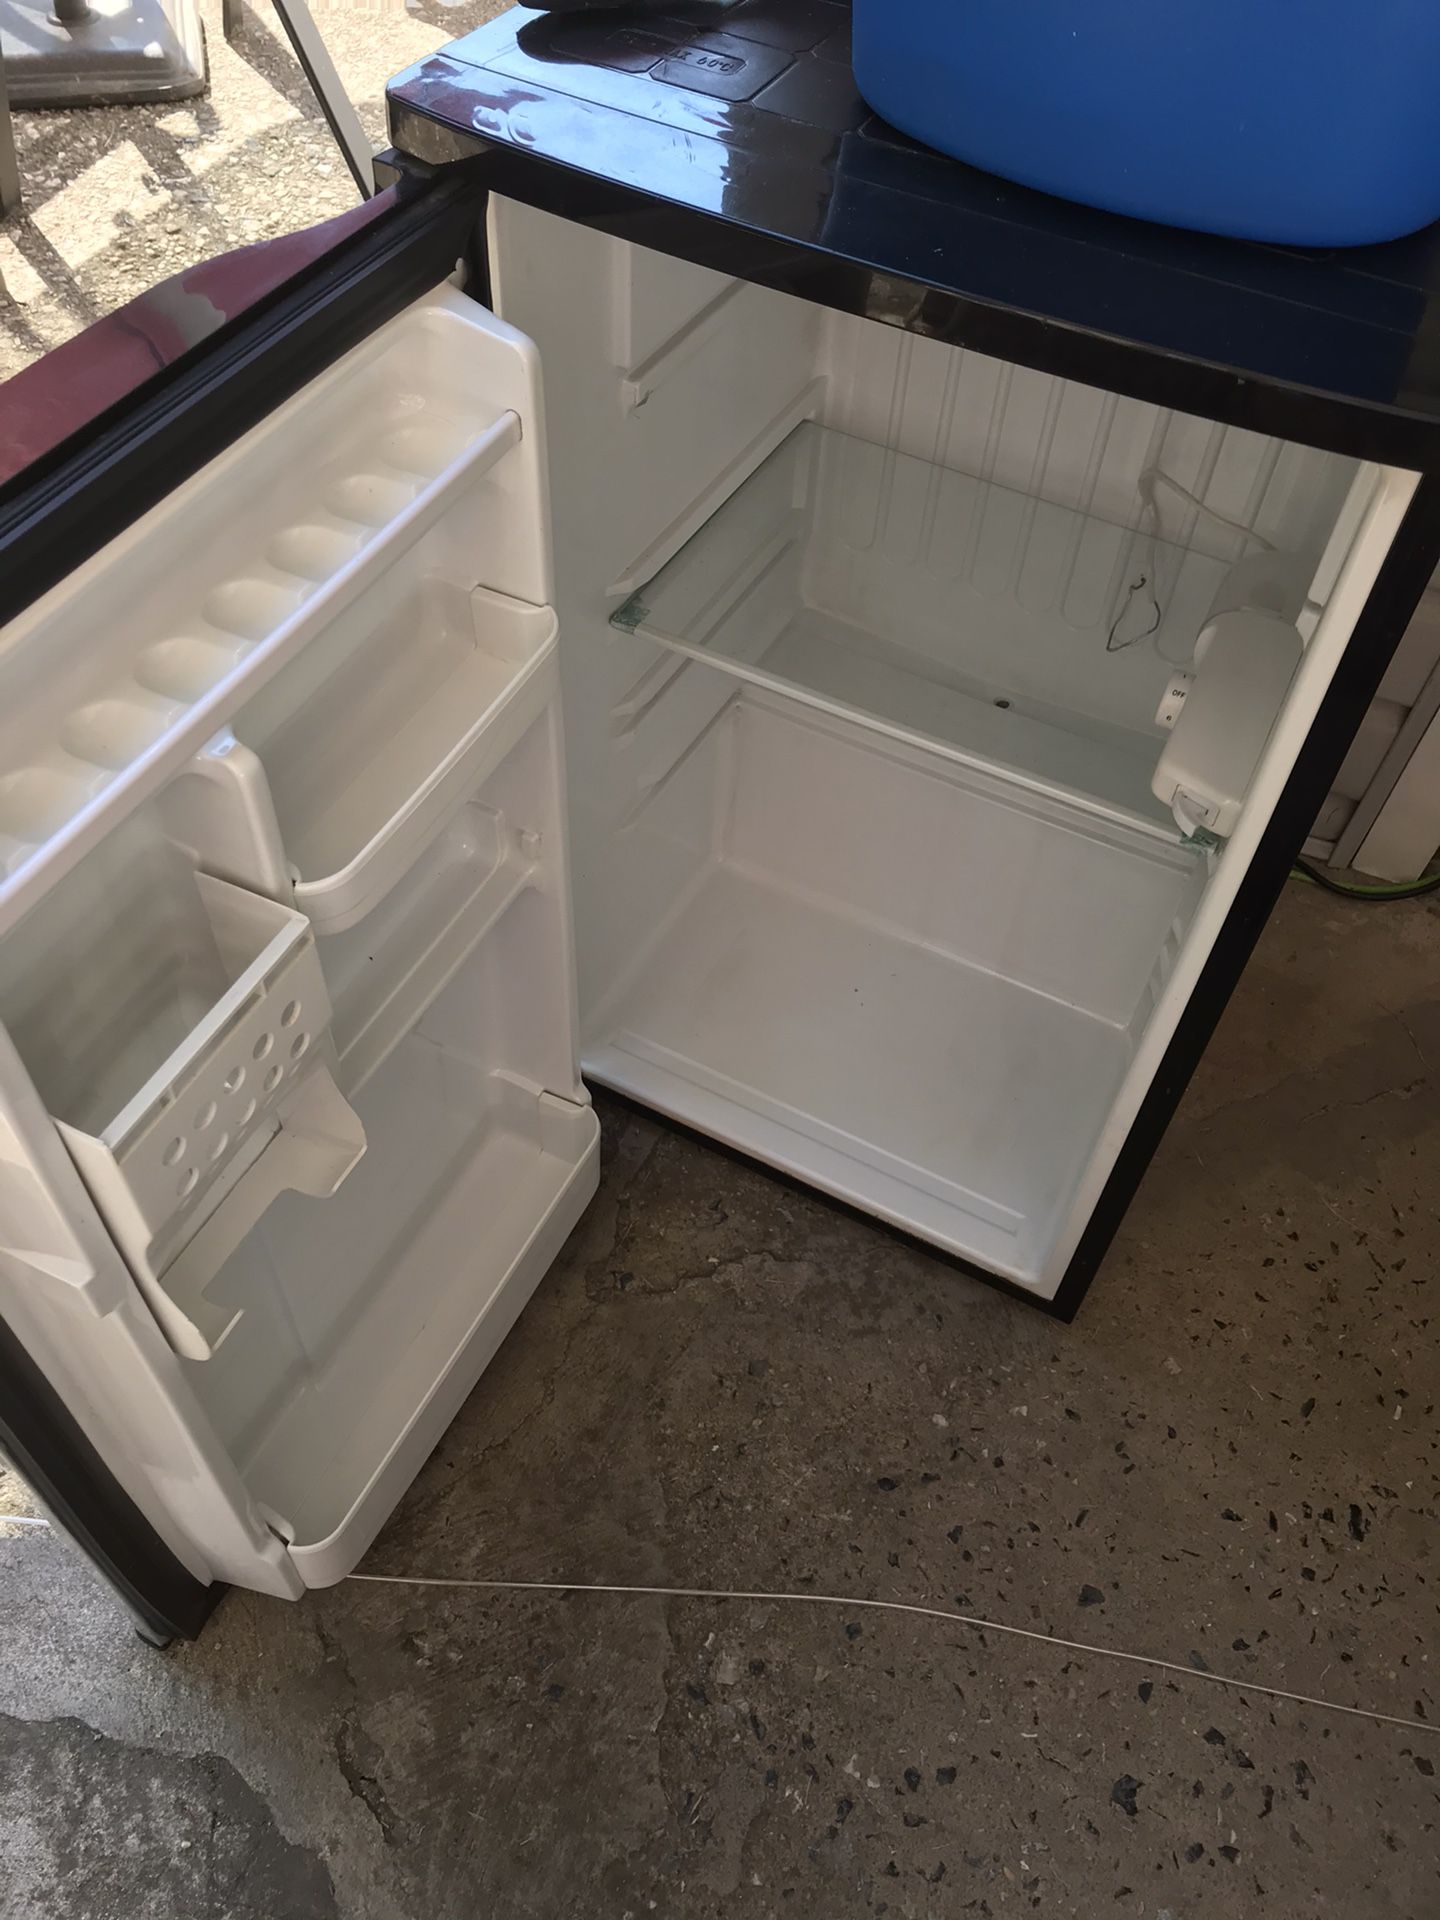 Mini fridge won’t stay cold. Not sure why make offer